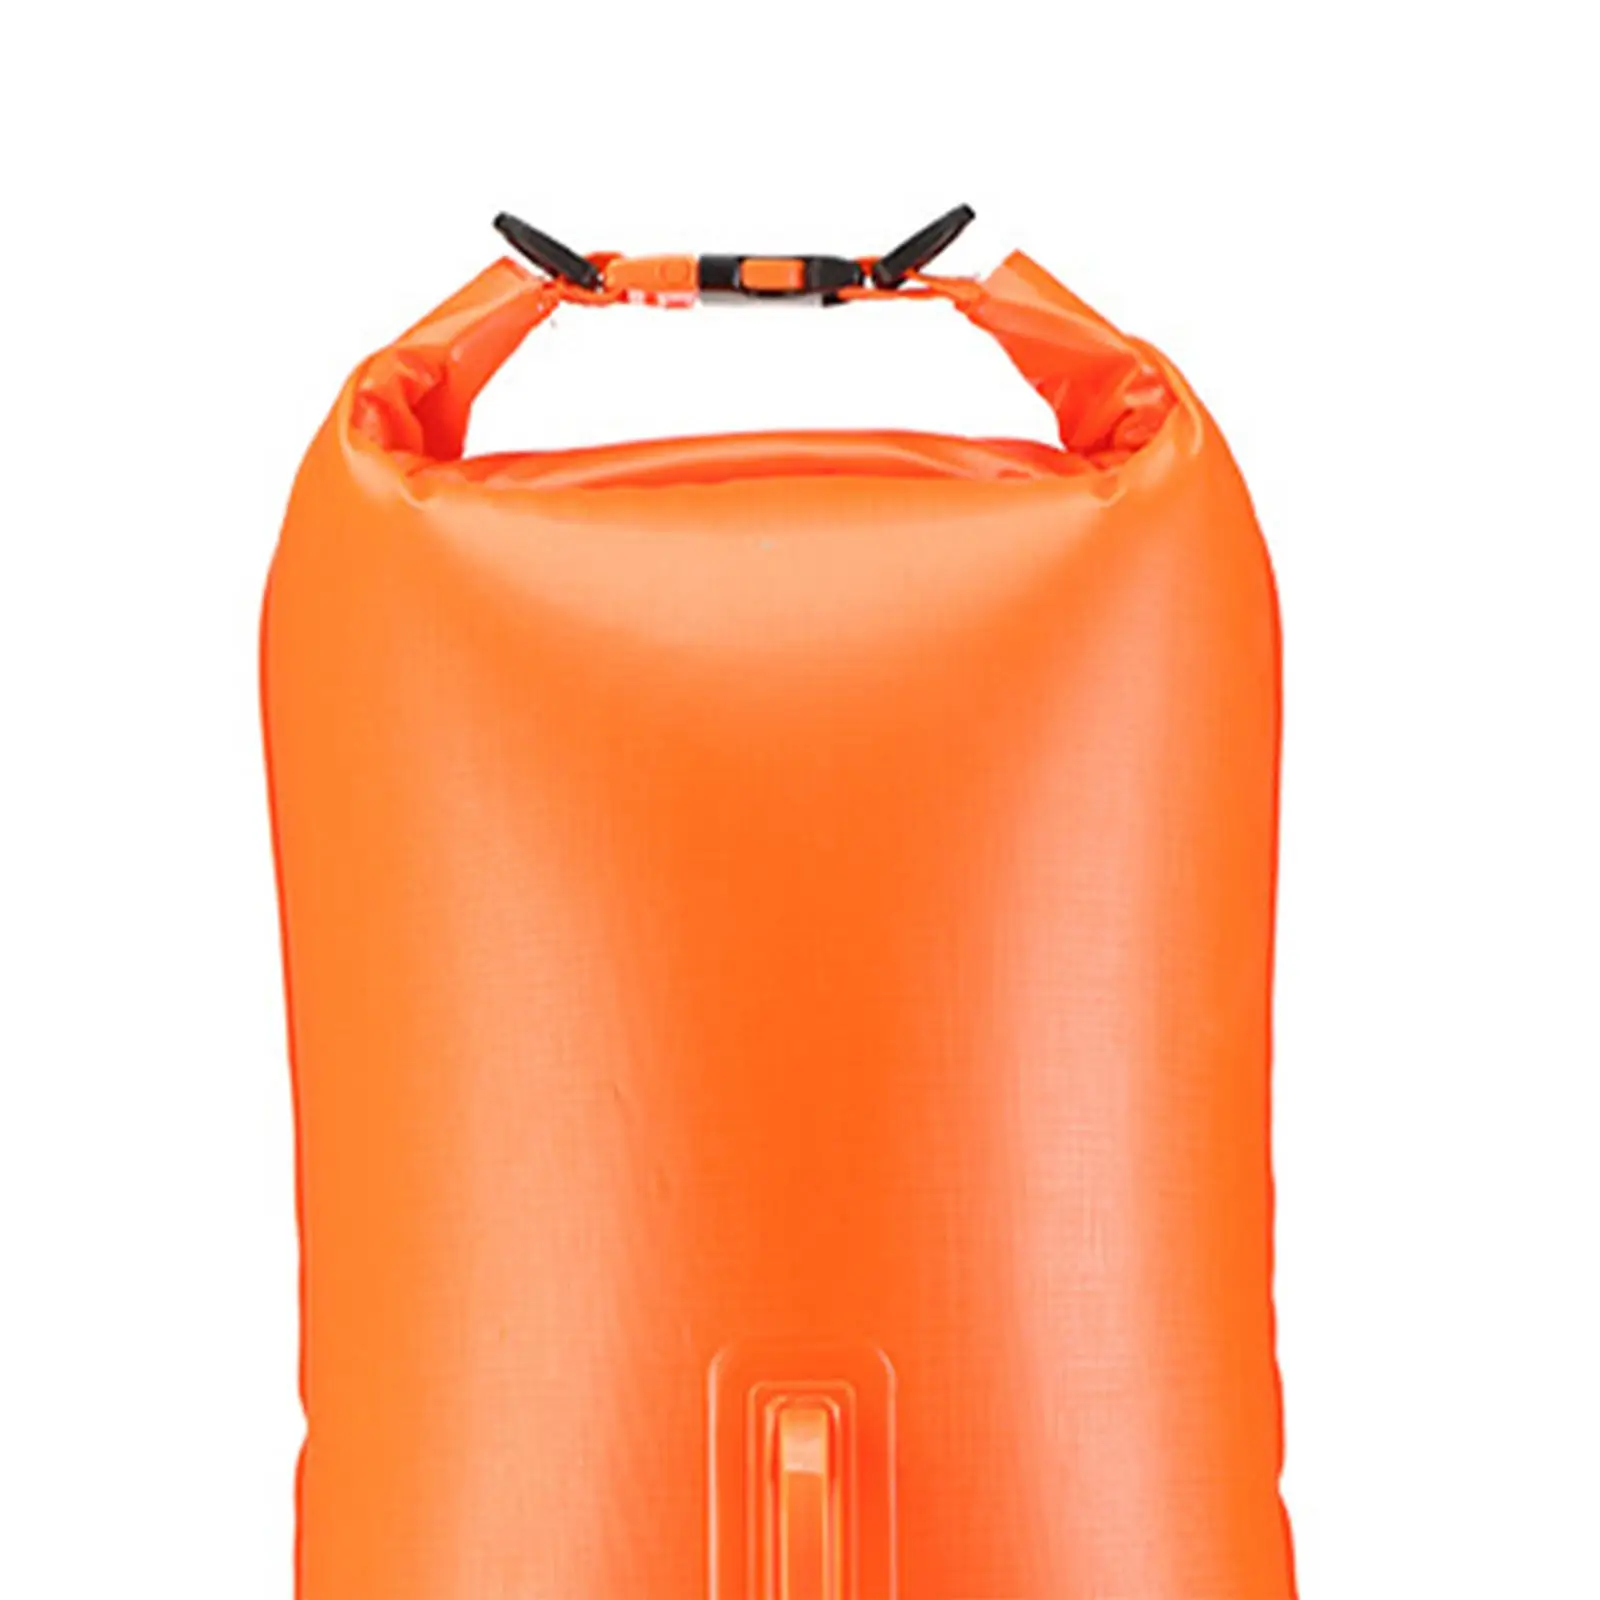 Safety Swim Buoy Waterproof Bag Water Swimming Float Swimming Tow Bag for Outdoor Rafting Water Sports Surfing Diving